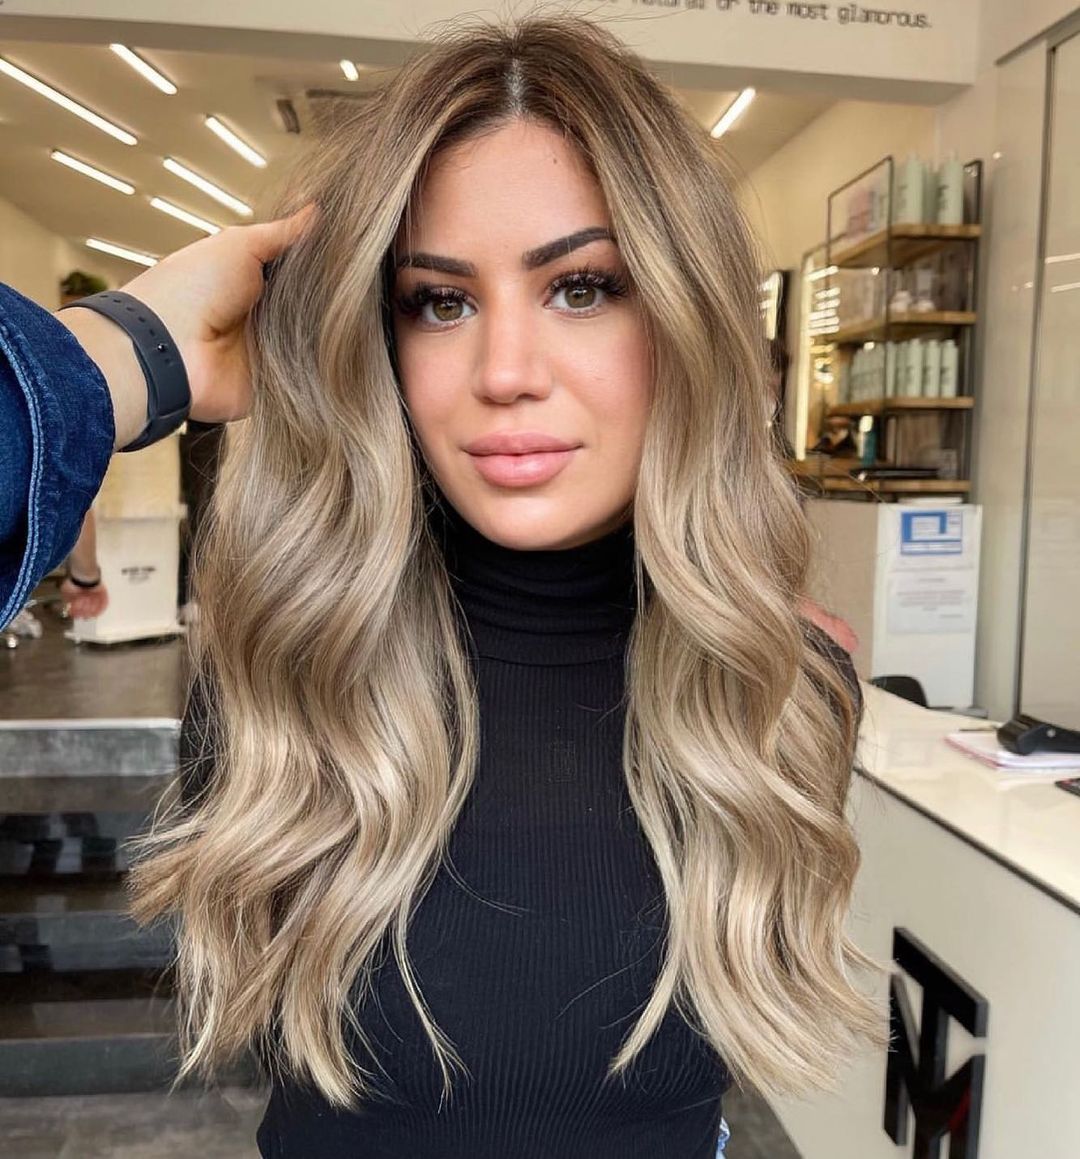 40 Best Balayage Hair Ideas That You Need To Check Out in 2021